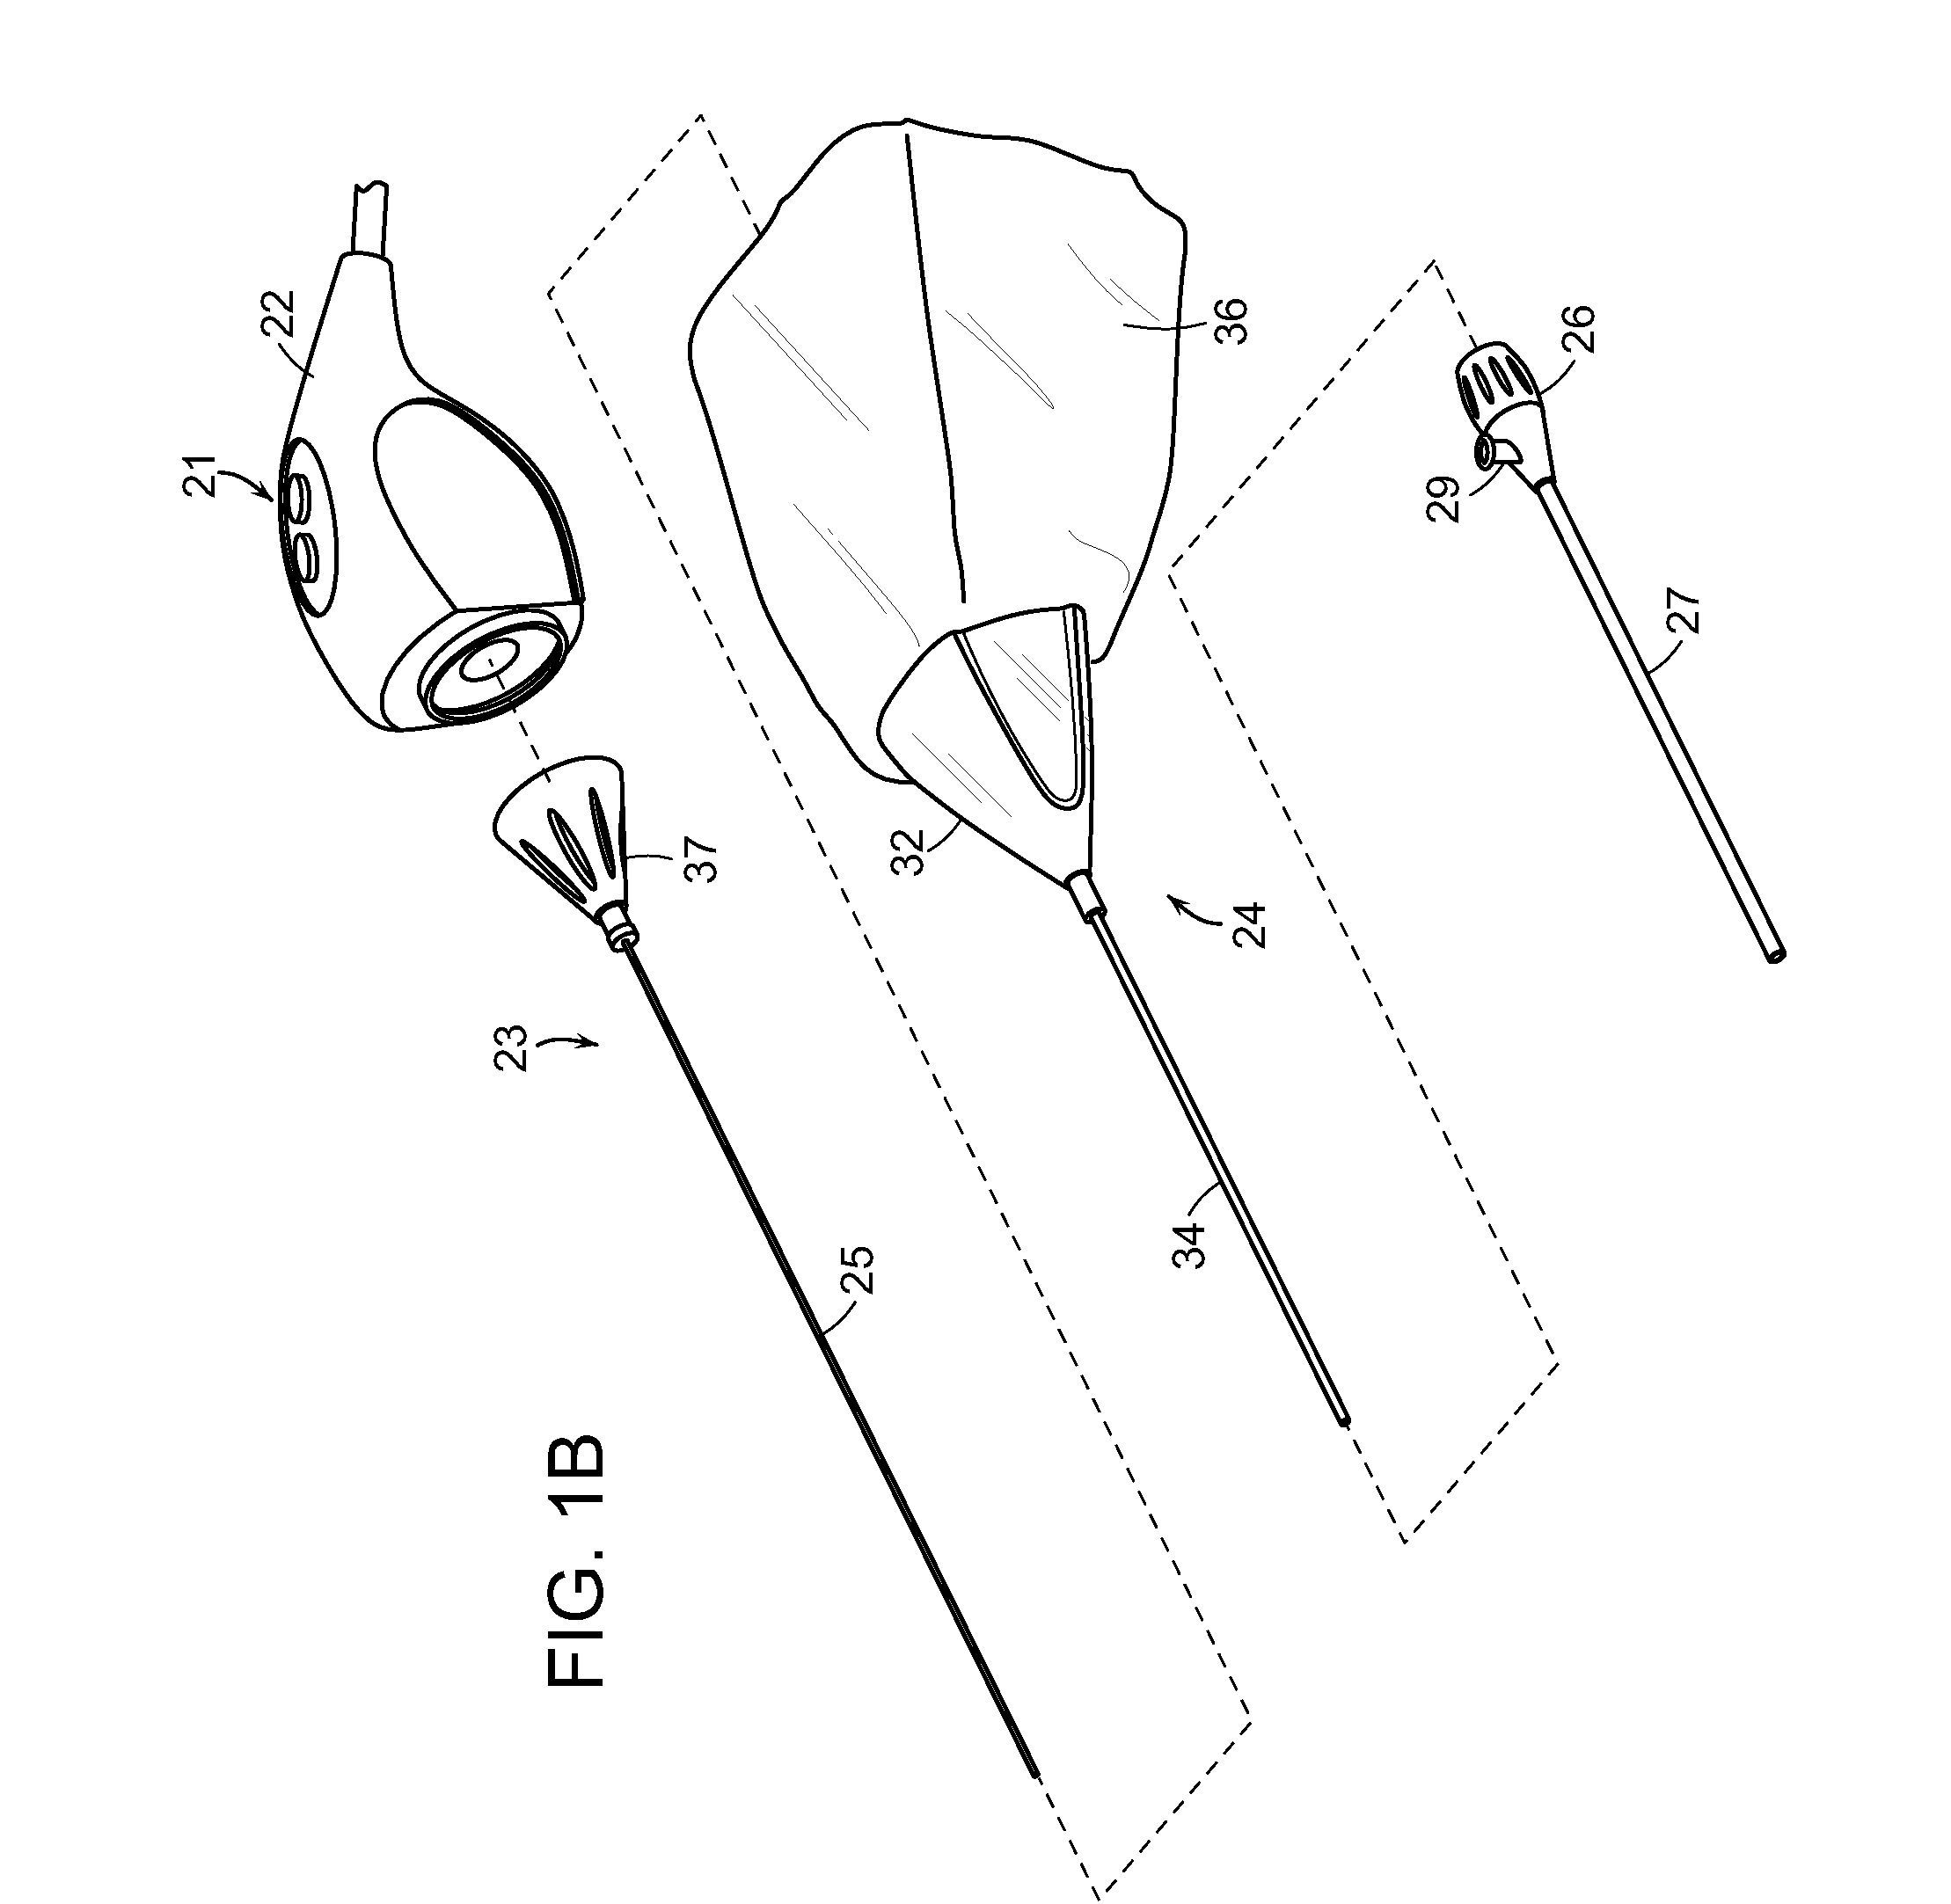 Devices and methods for minimally invasive arthroscopic surgery